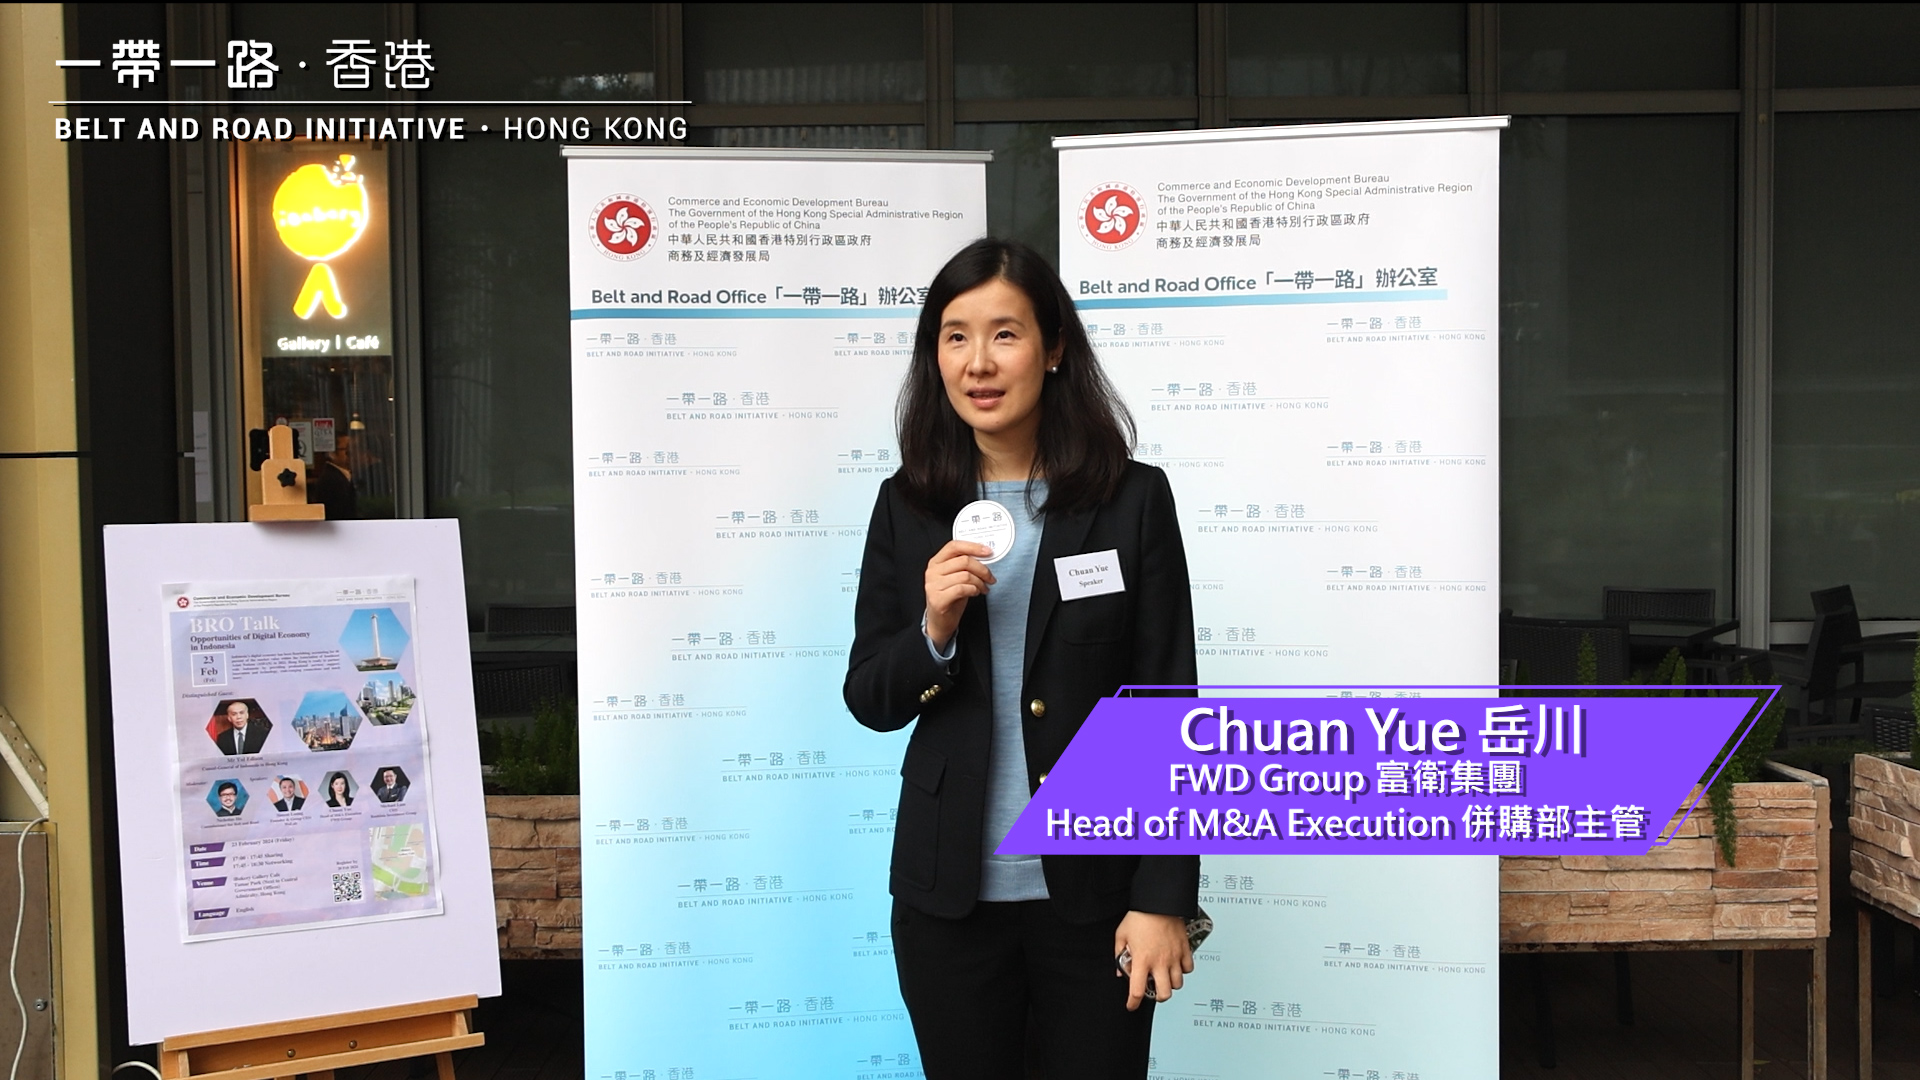 Interview with Ms Chuan Yue